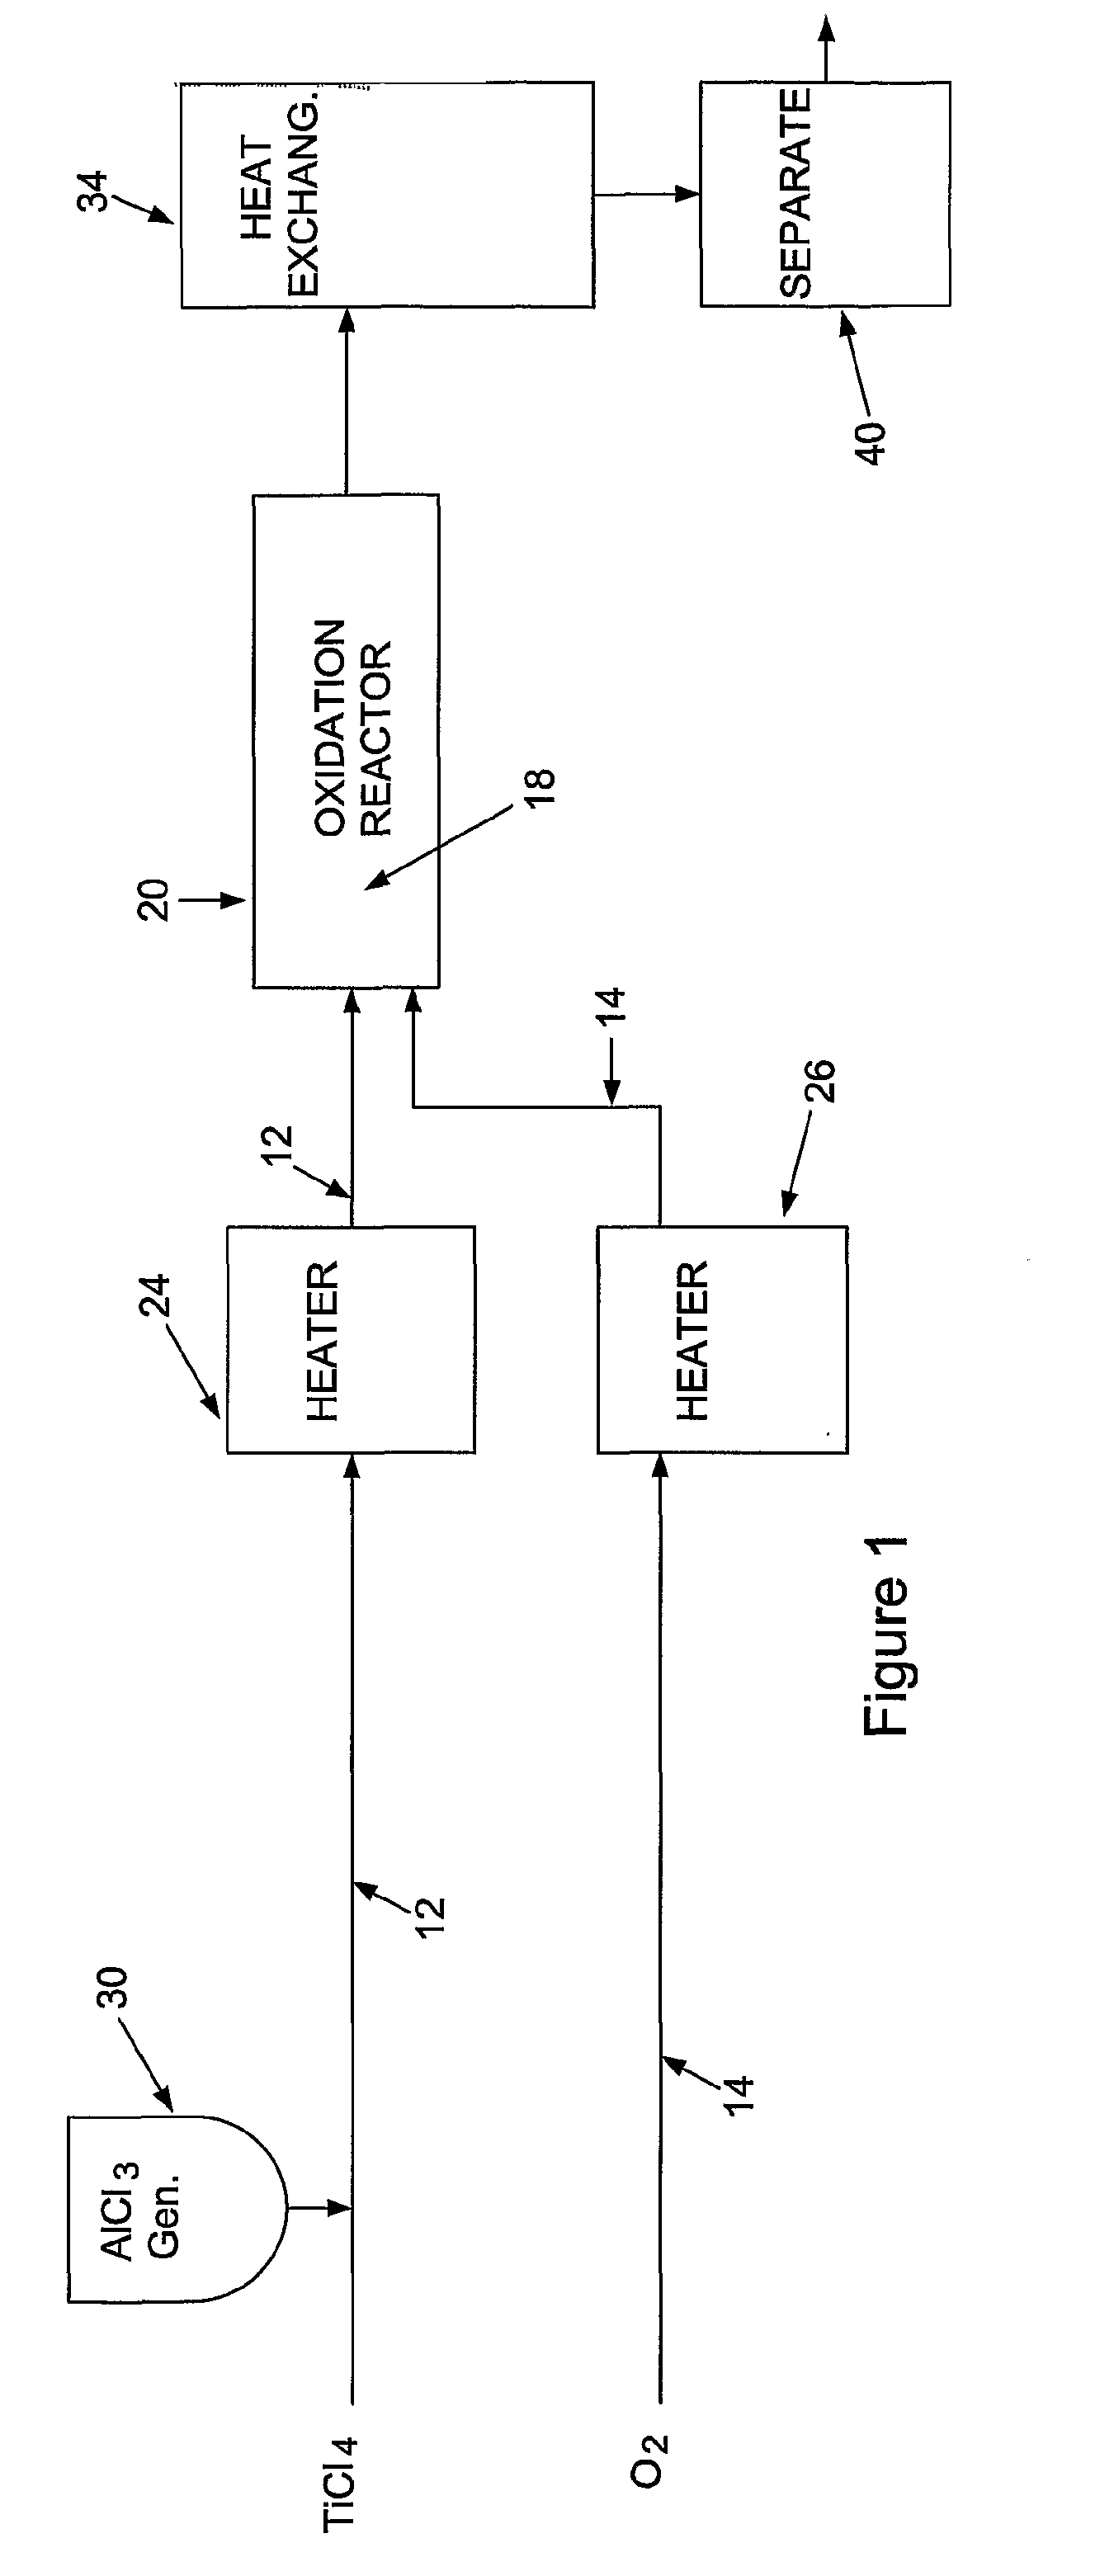 Methods of Controlling the Particle of Titanium Dioxide Produced by the Chloride Process